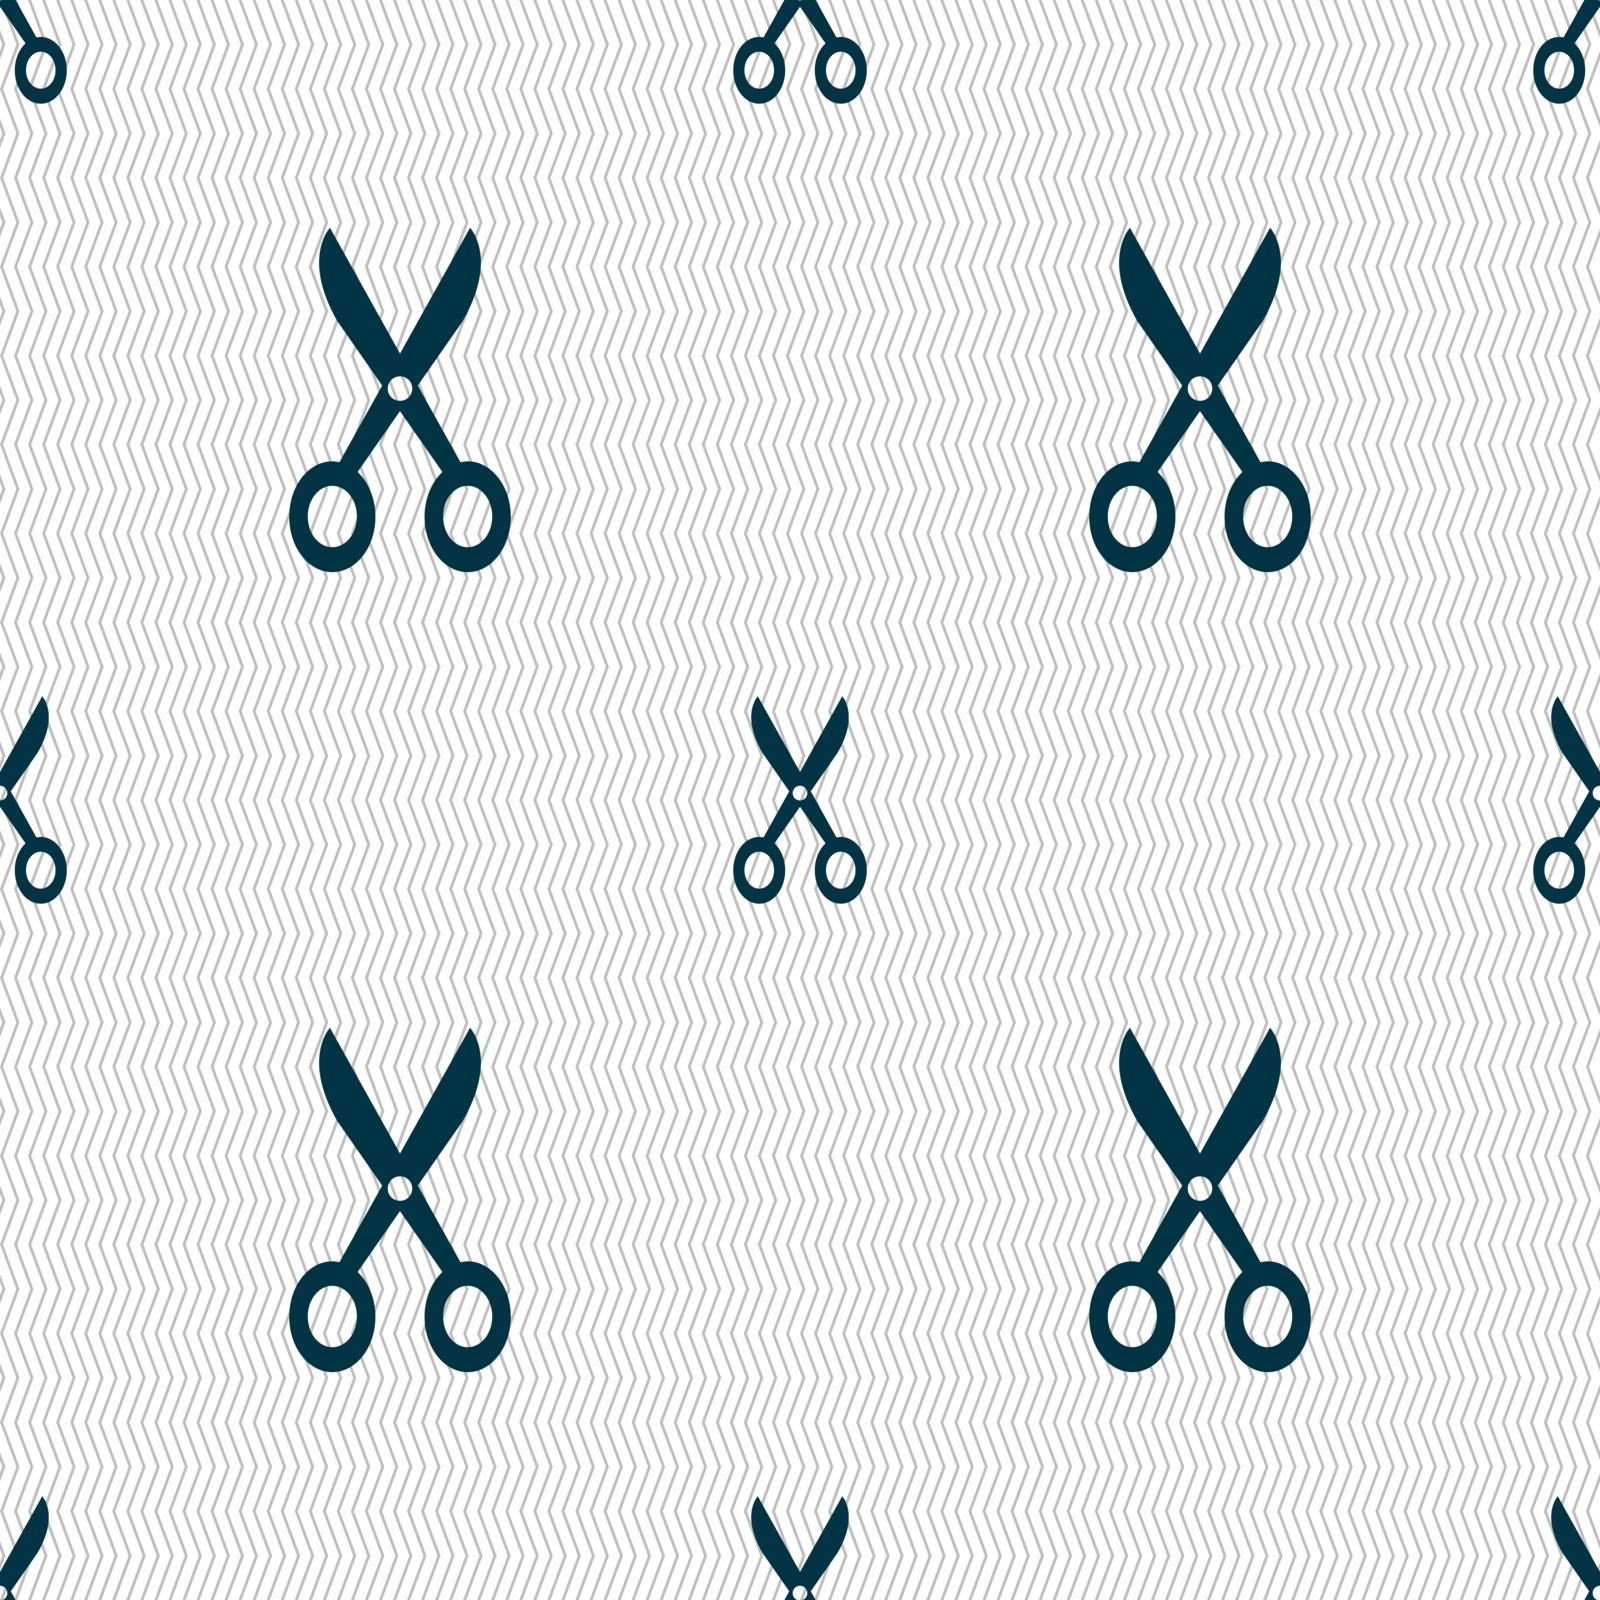 Scissors icon sign. Seamless pattern with geometric texture. Vector illustration